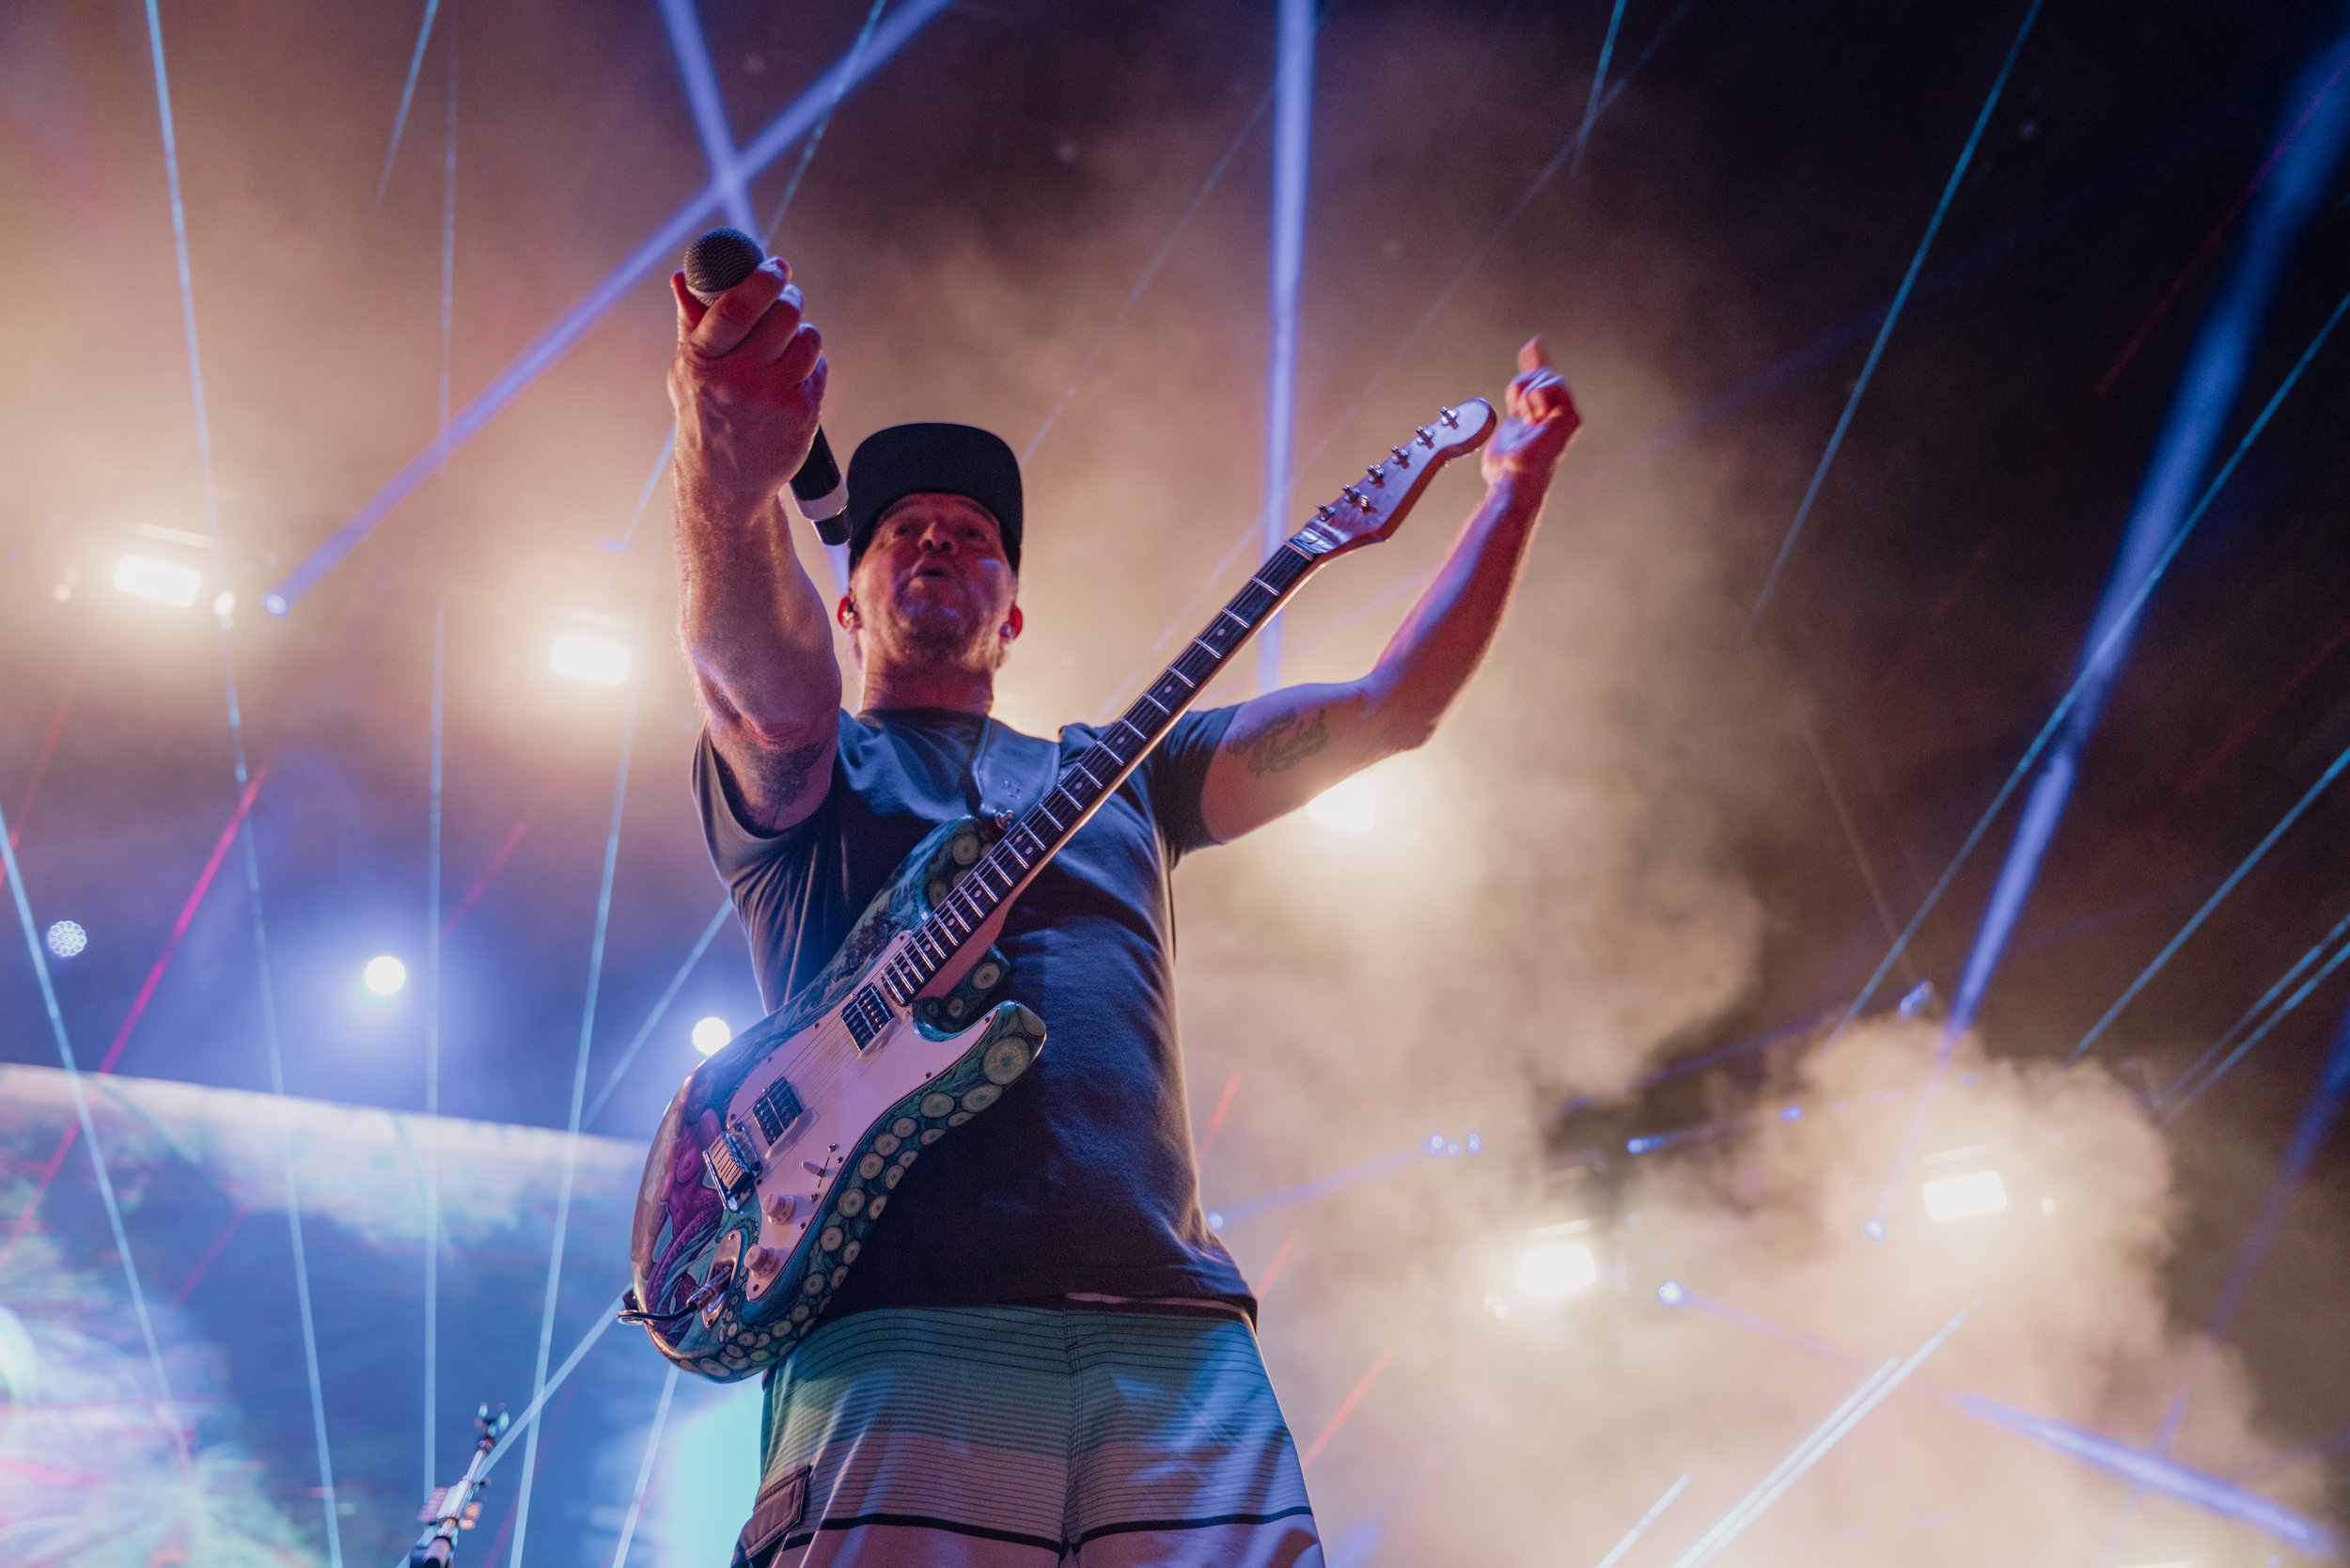 Slightly Stoopid, Sublime with Rome, Atmosphere & The Movement - Summertime  USA 2023